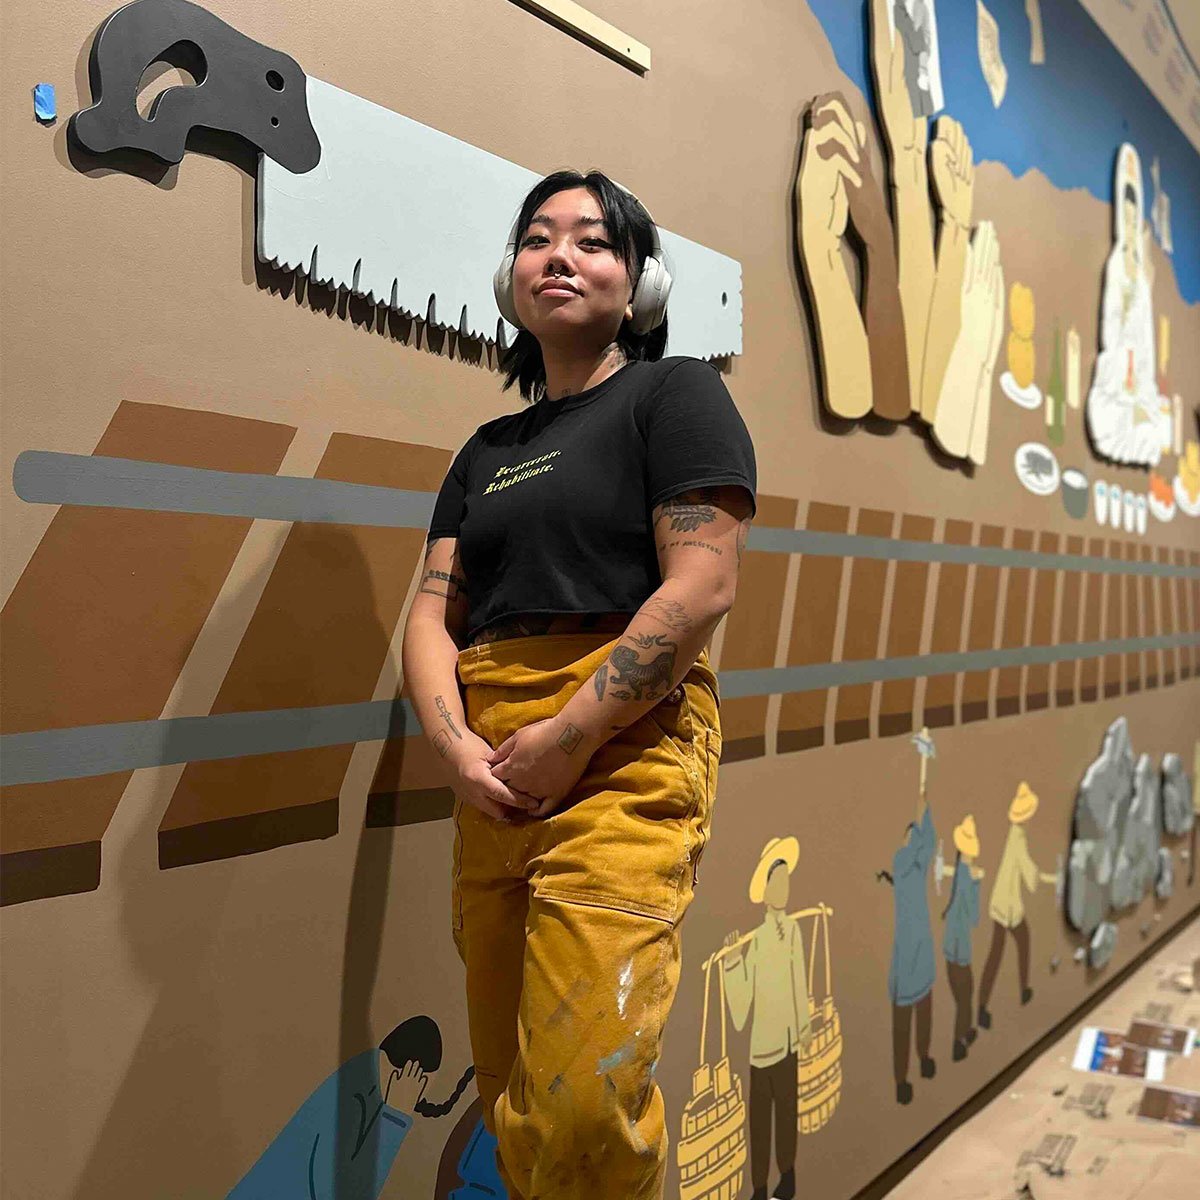 Monyee Chau standing in front of a wall full of cultural art